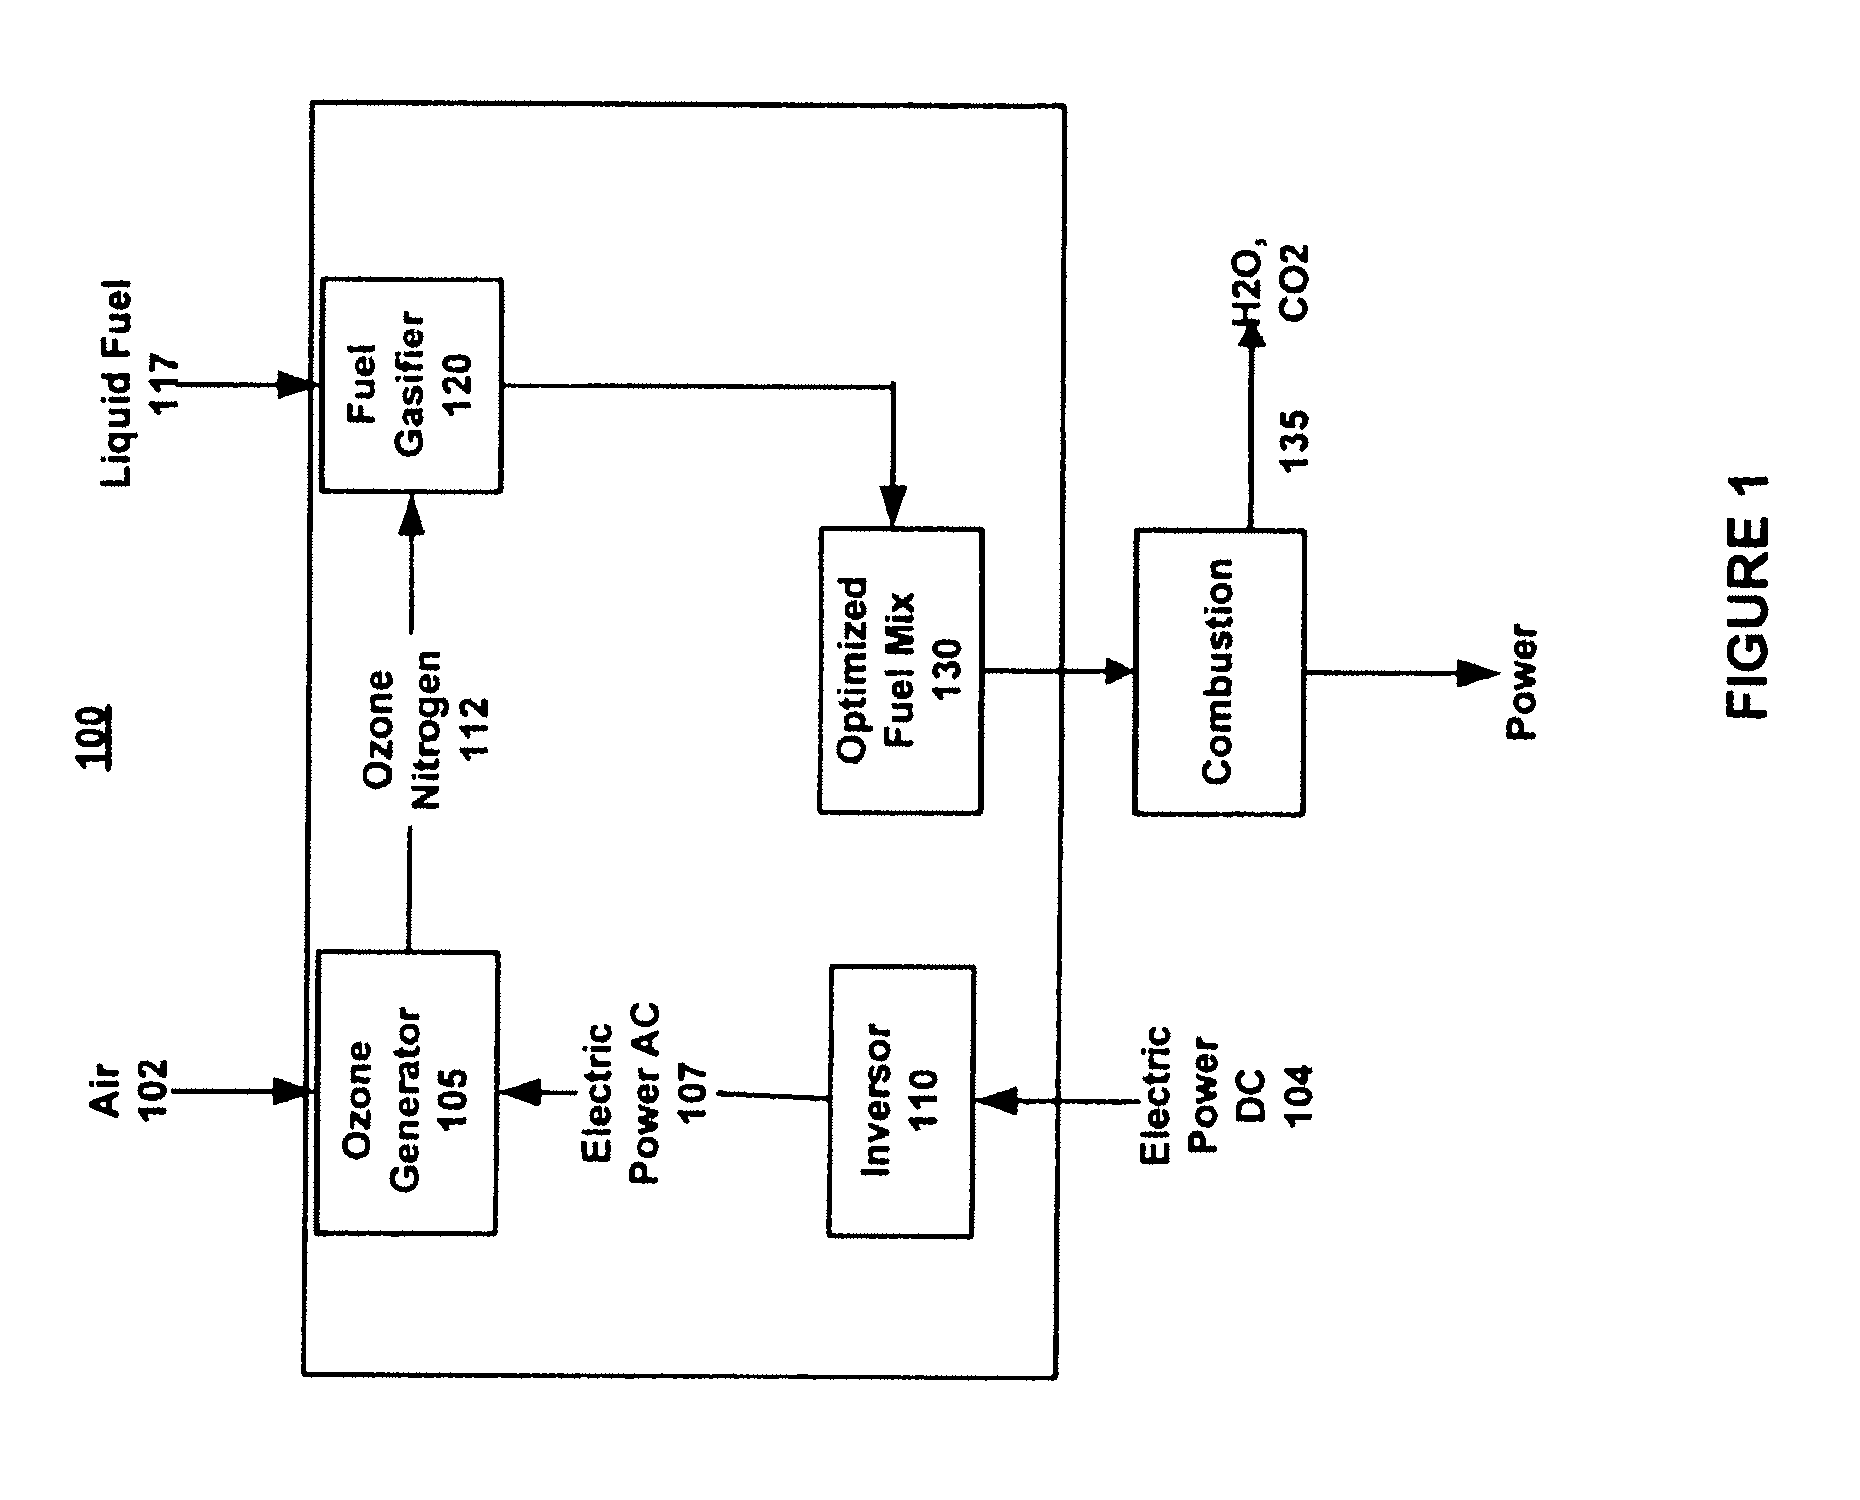 System and method for preparing an optimized fuel mixture